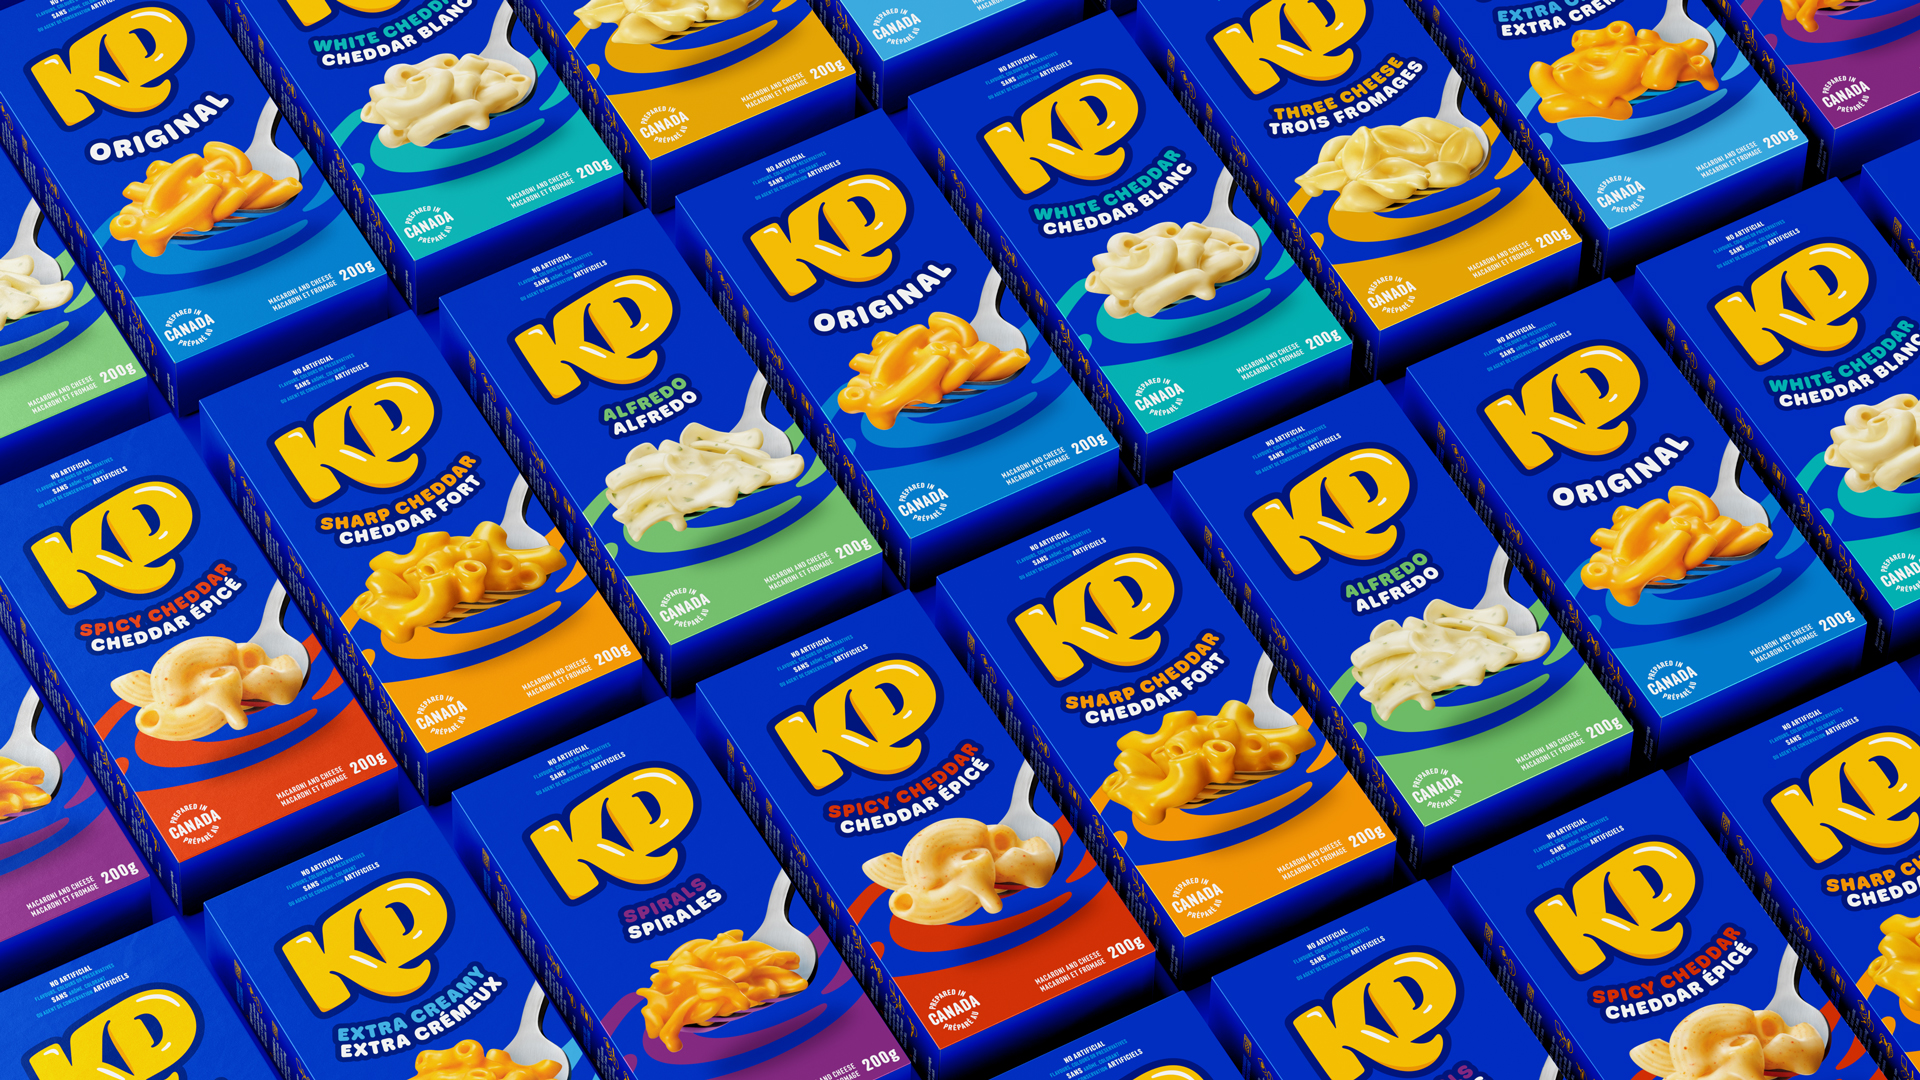 KD box redesign with flavor variations.